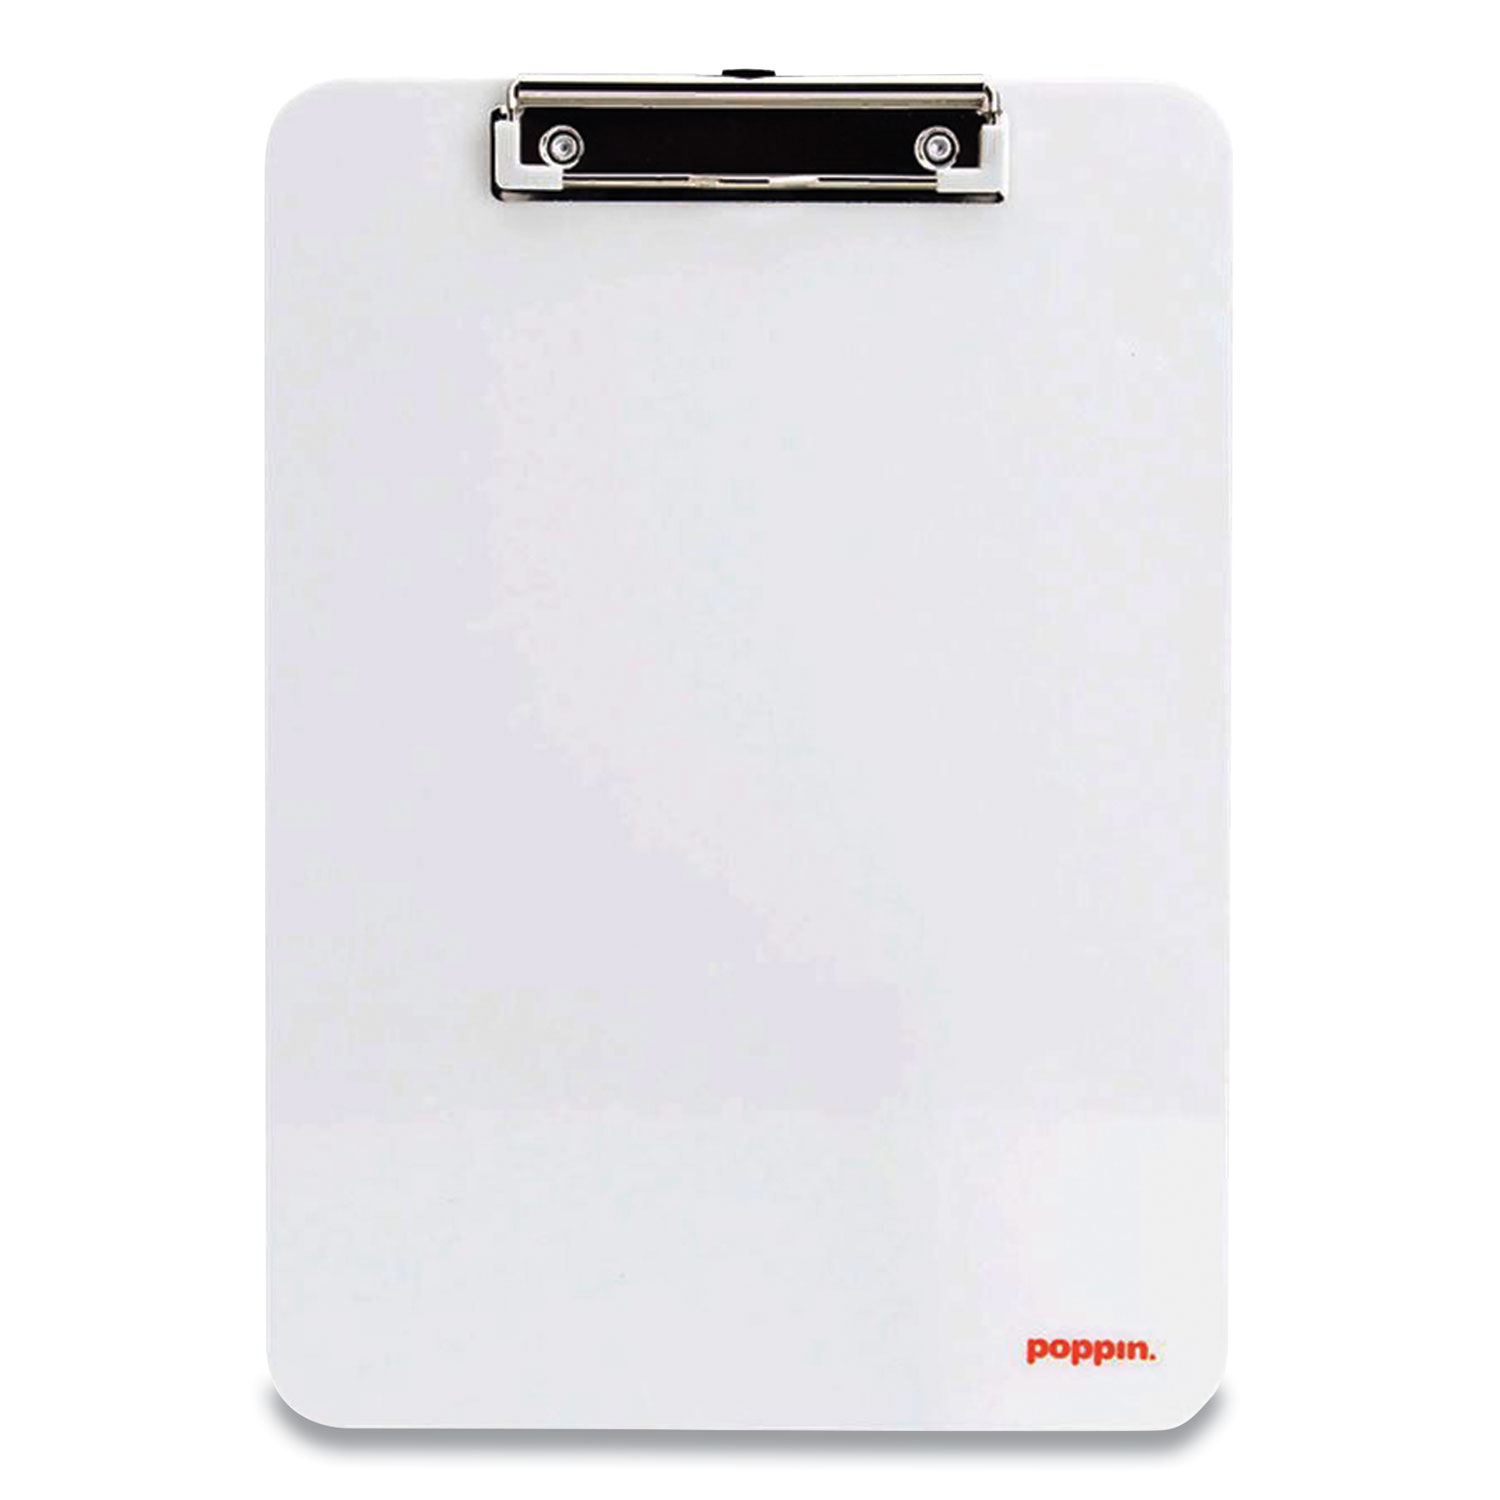  Poppin 100149 Plastic Clipboard, Holds 8.5 x 11 Sheets, White (PPJ570150) 